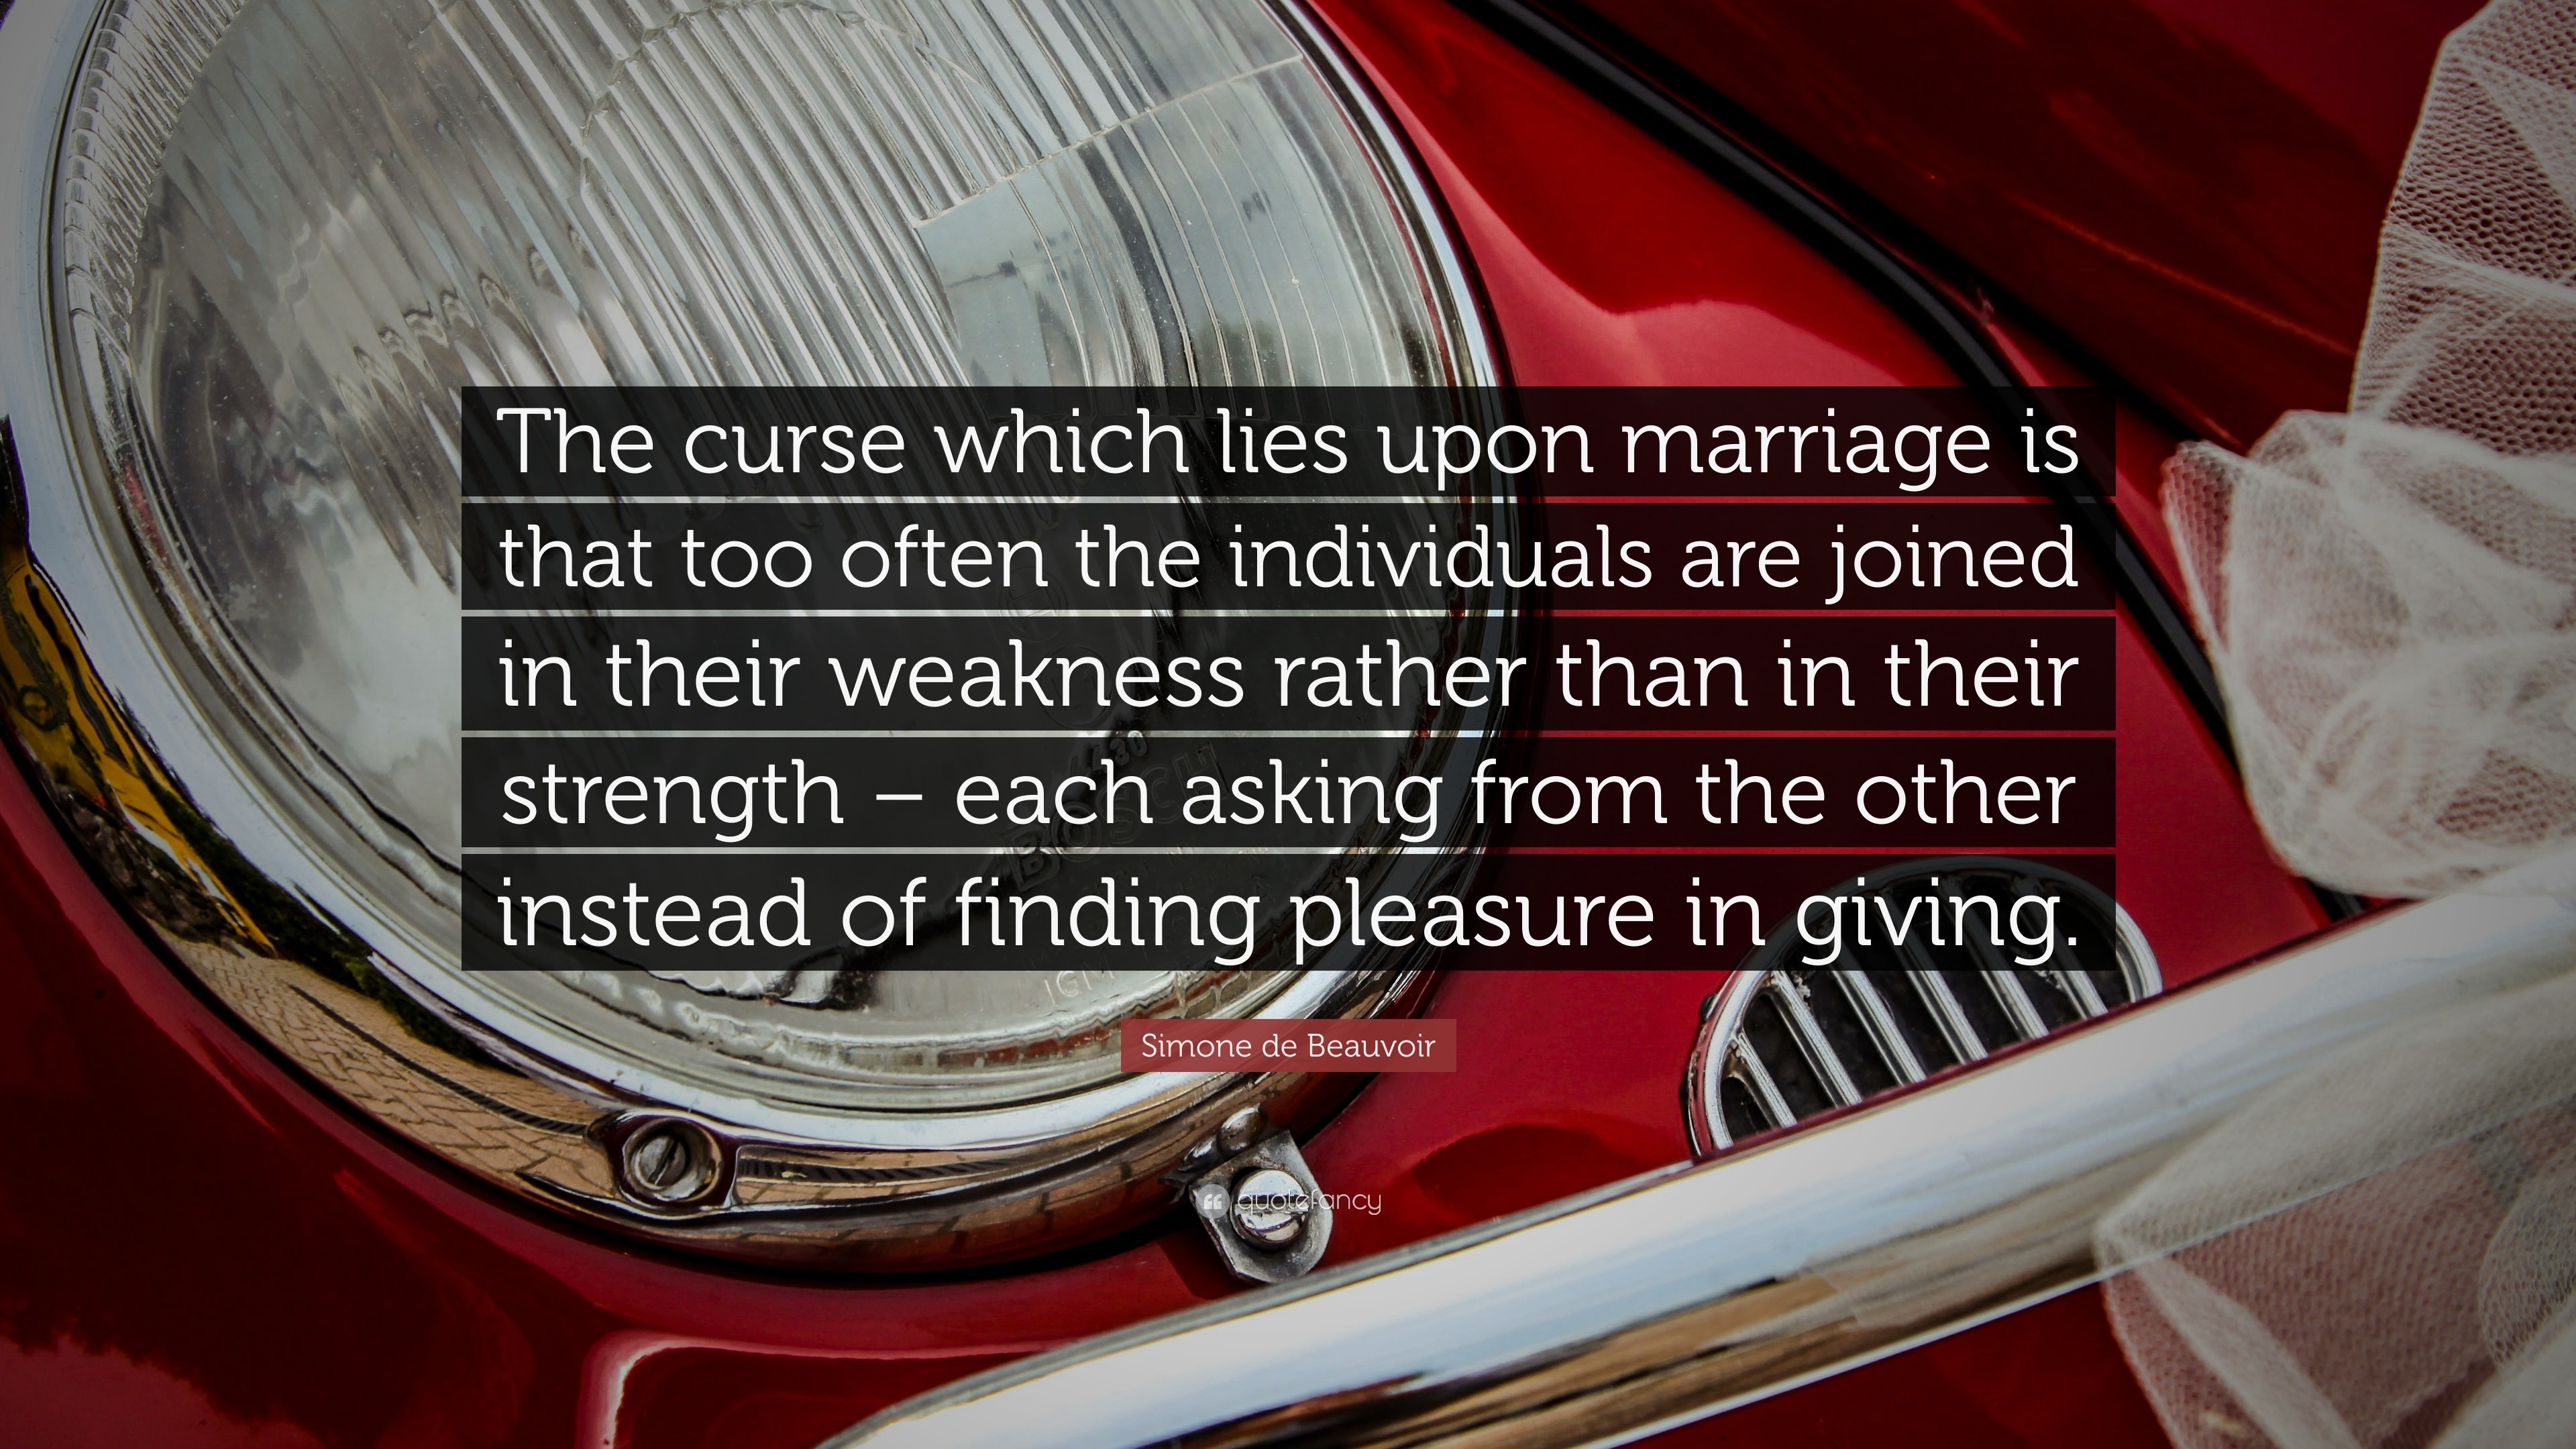 Marriage of Lies